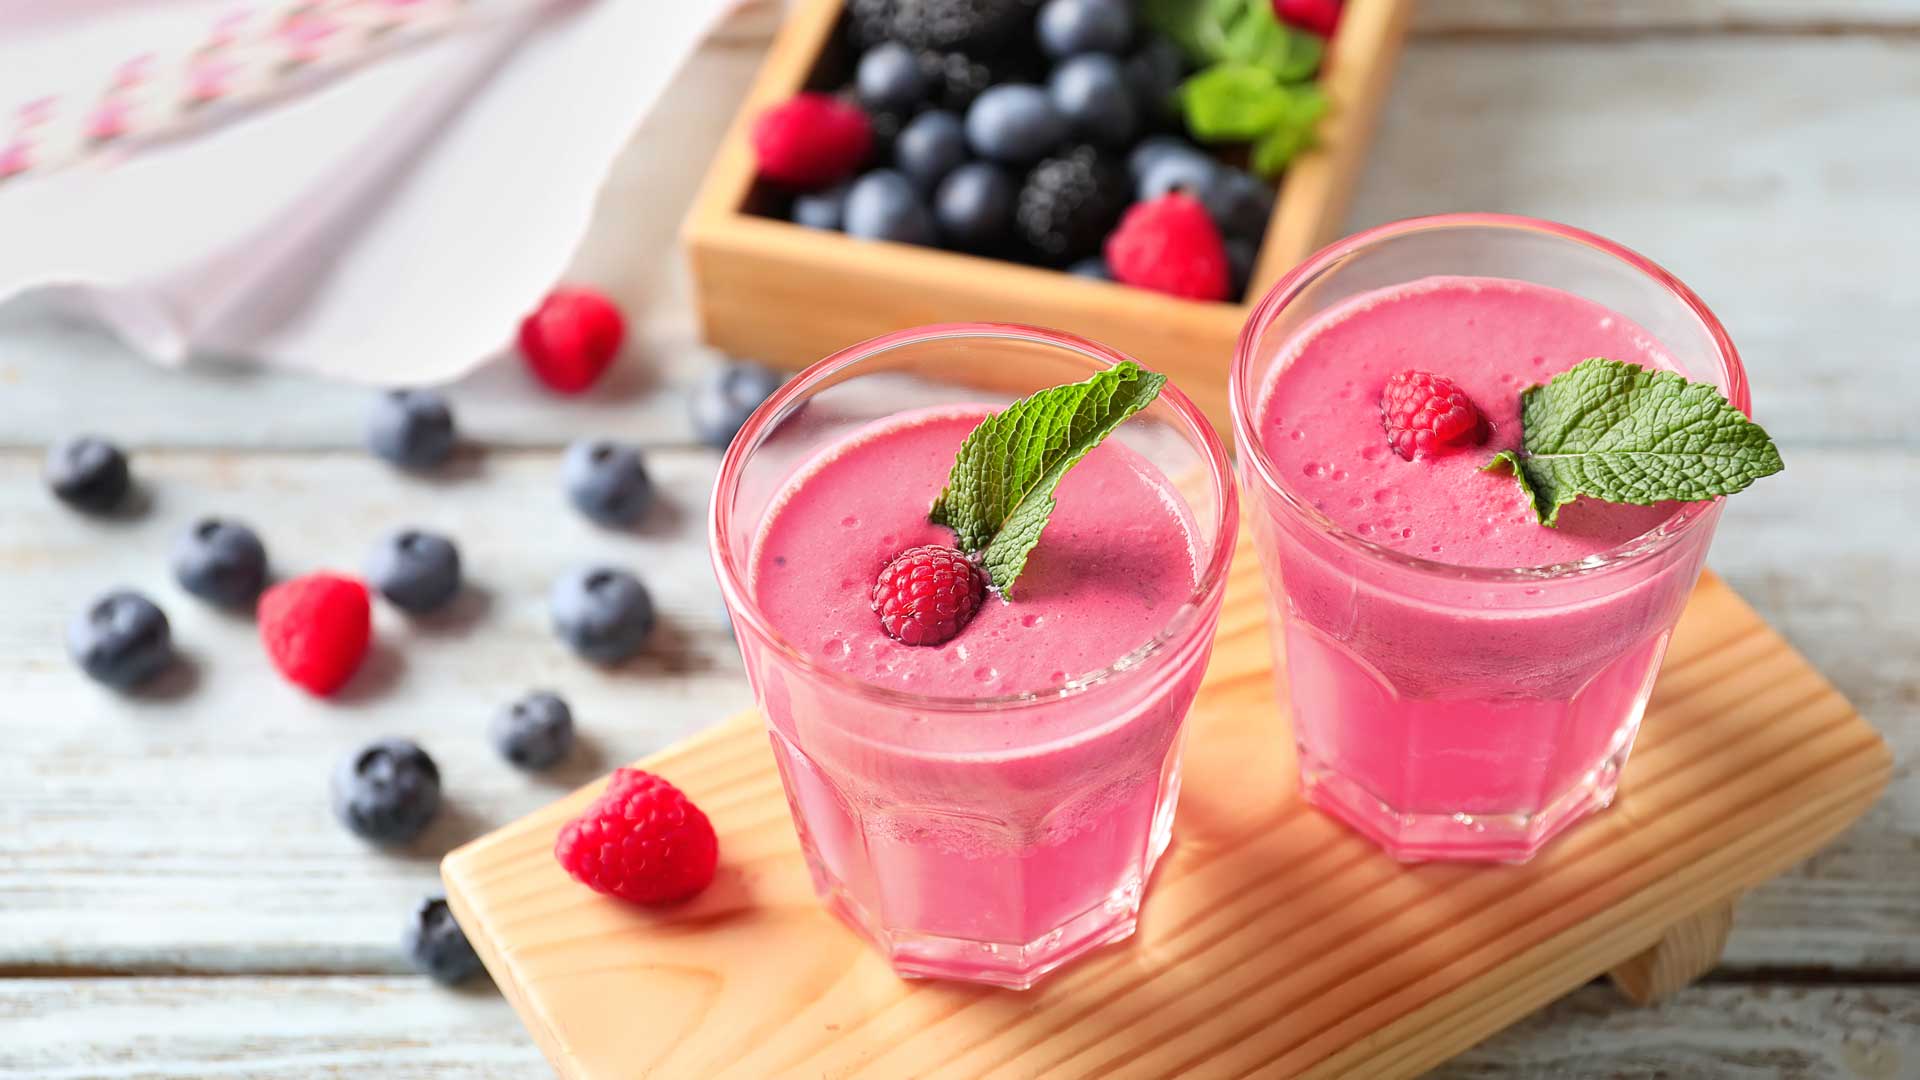 Two glasses filled with pink smoothie